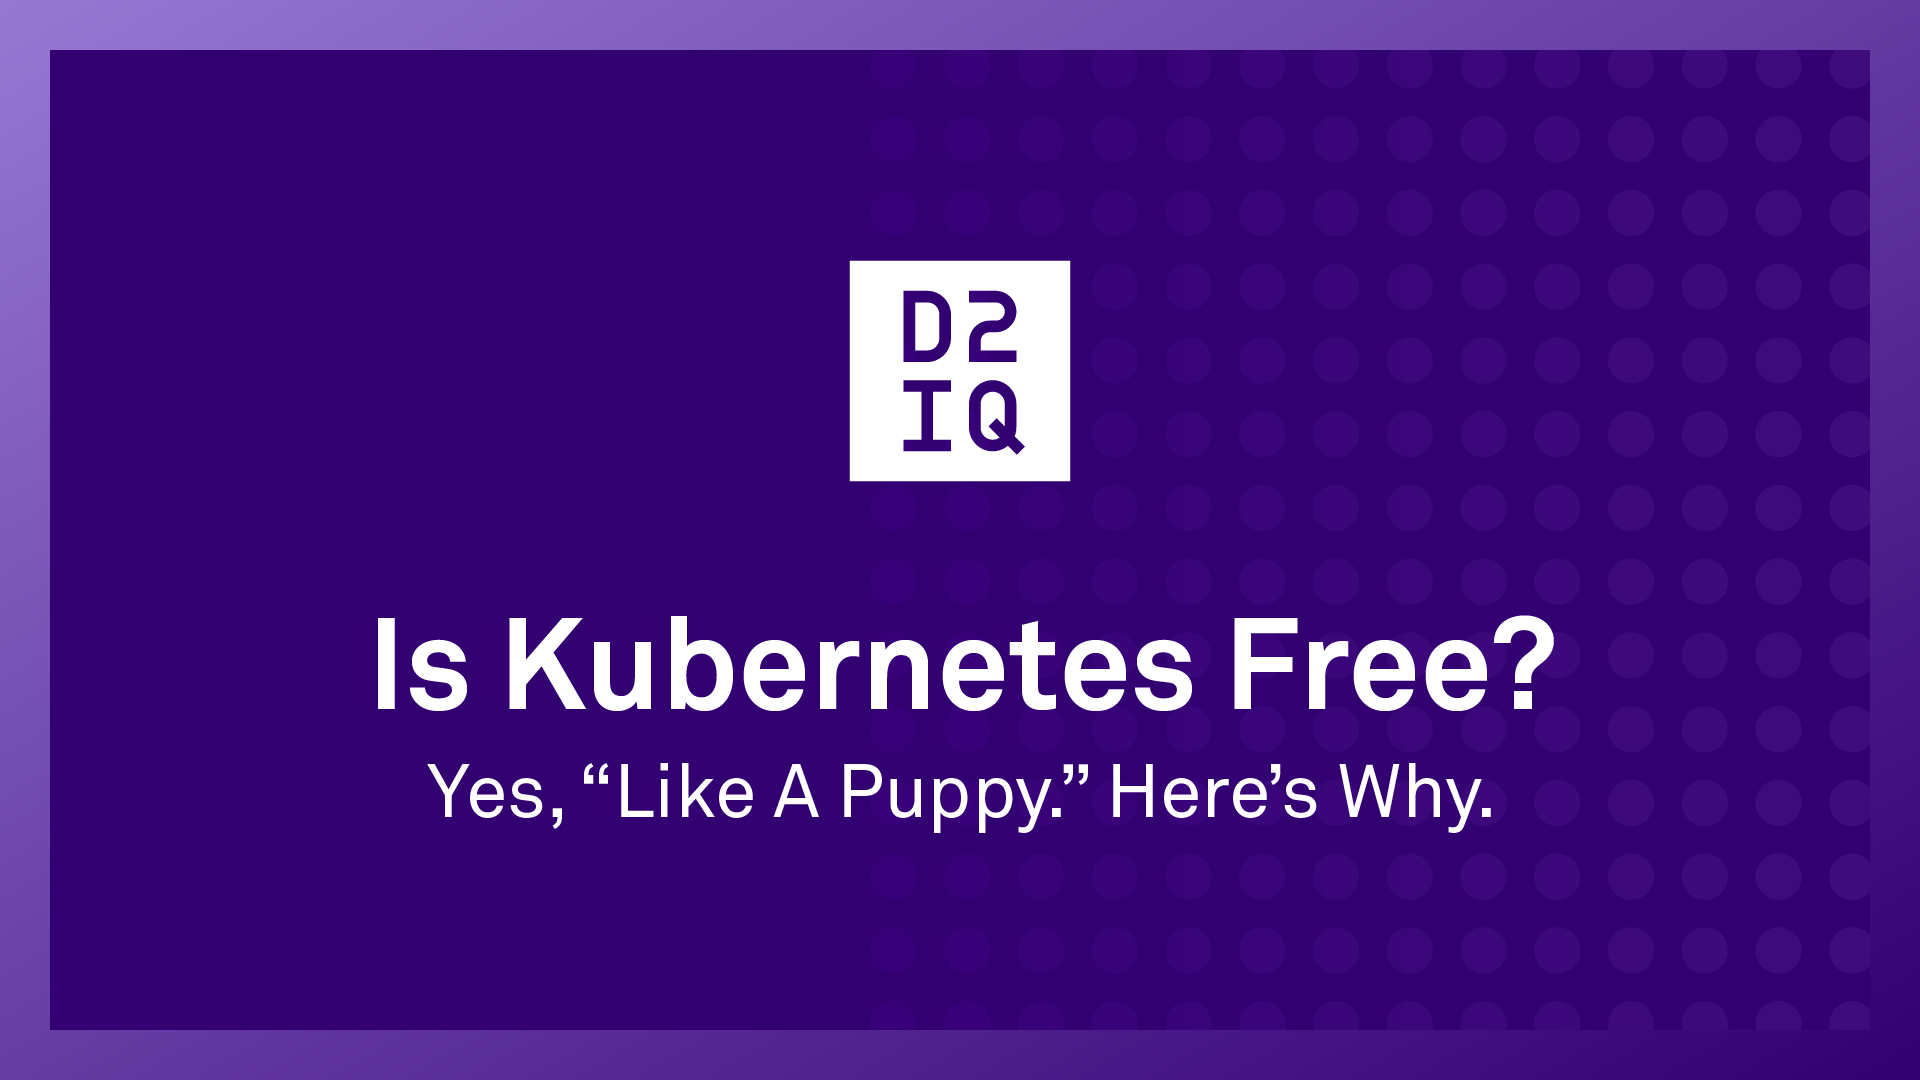 Is Kubernetes Free? Yes, Like a Puppy. Here's Why.